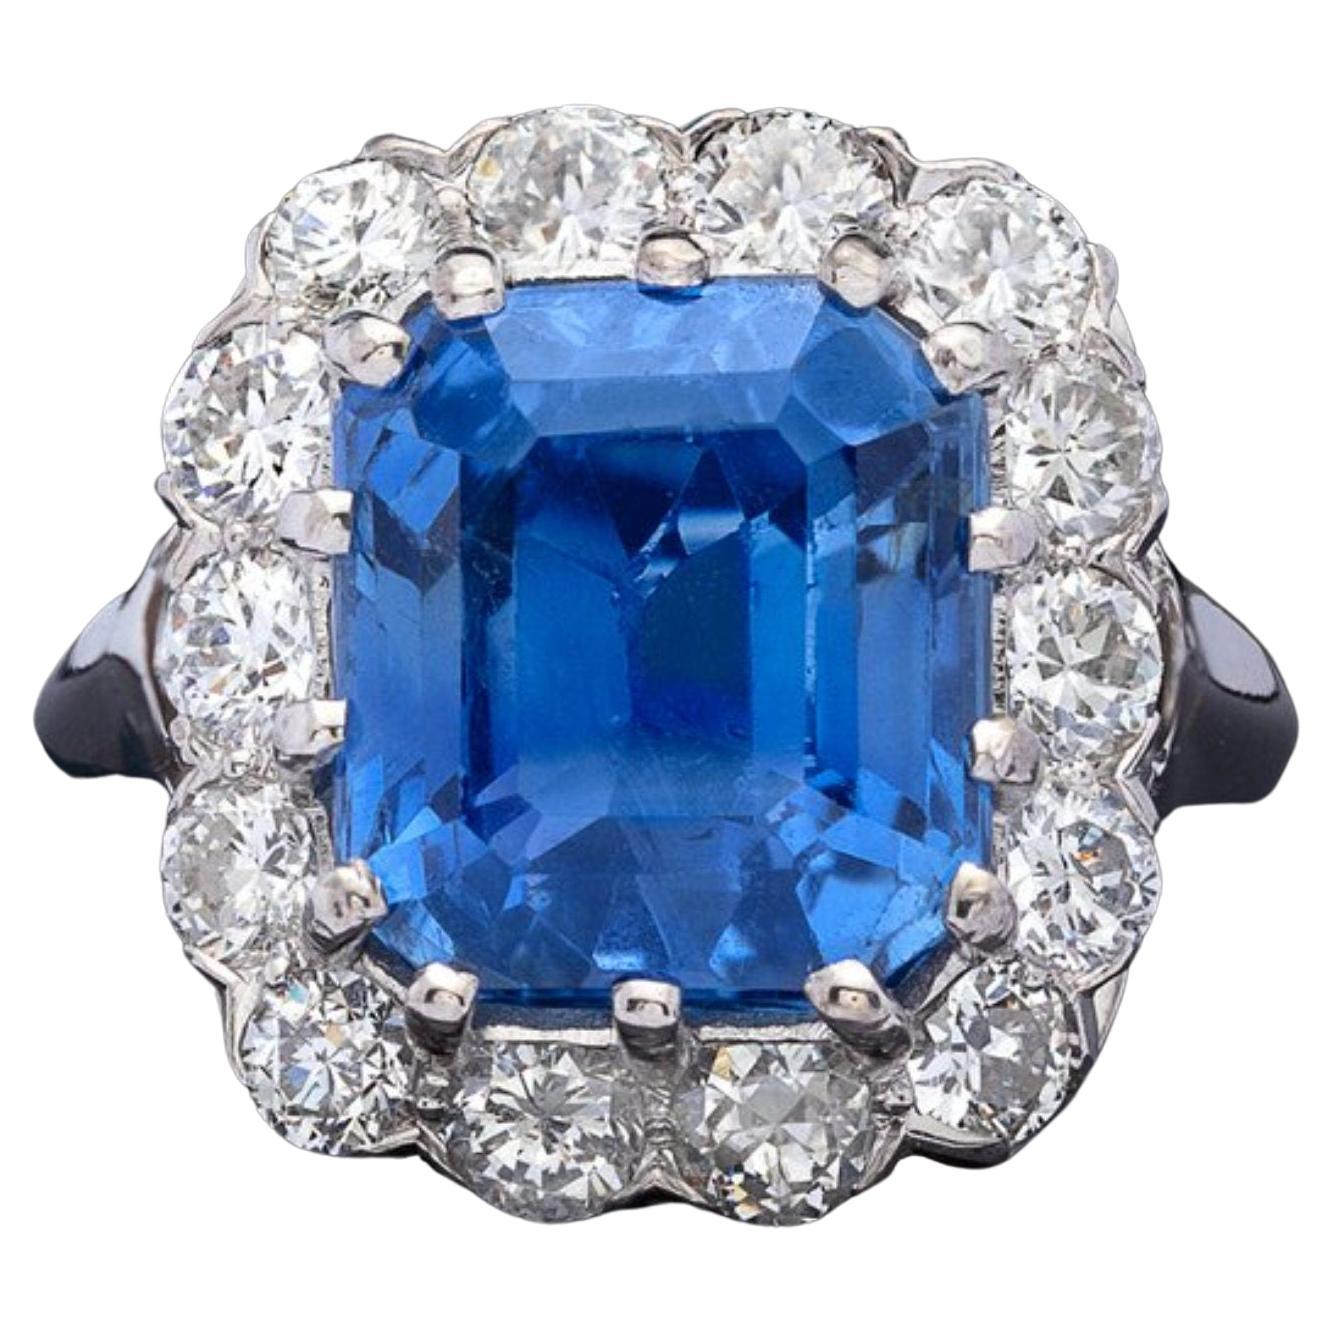 For Sale:  18K Gold 5 CT Natural Sapphire Diamond Antique Art Deco Style Engagement Ring